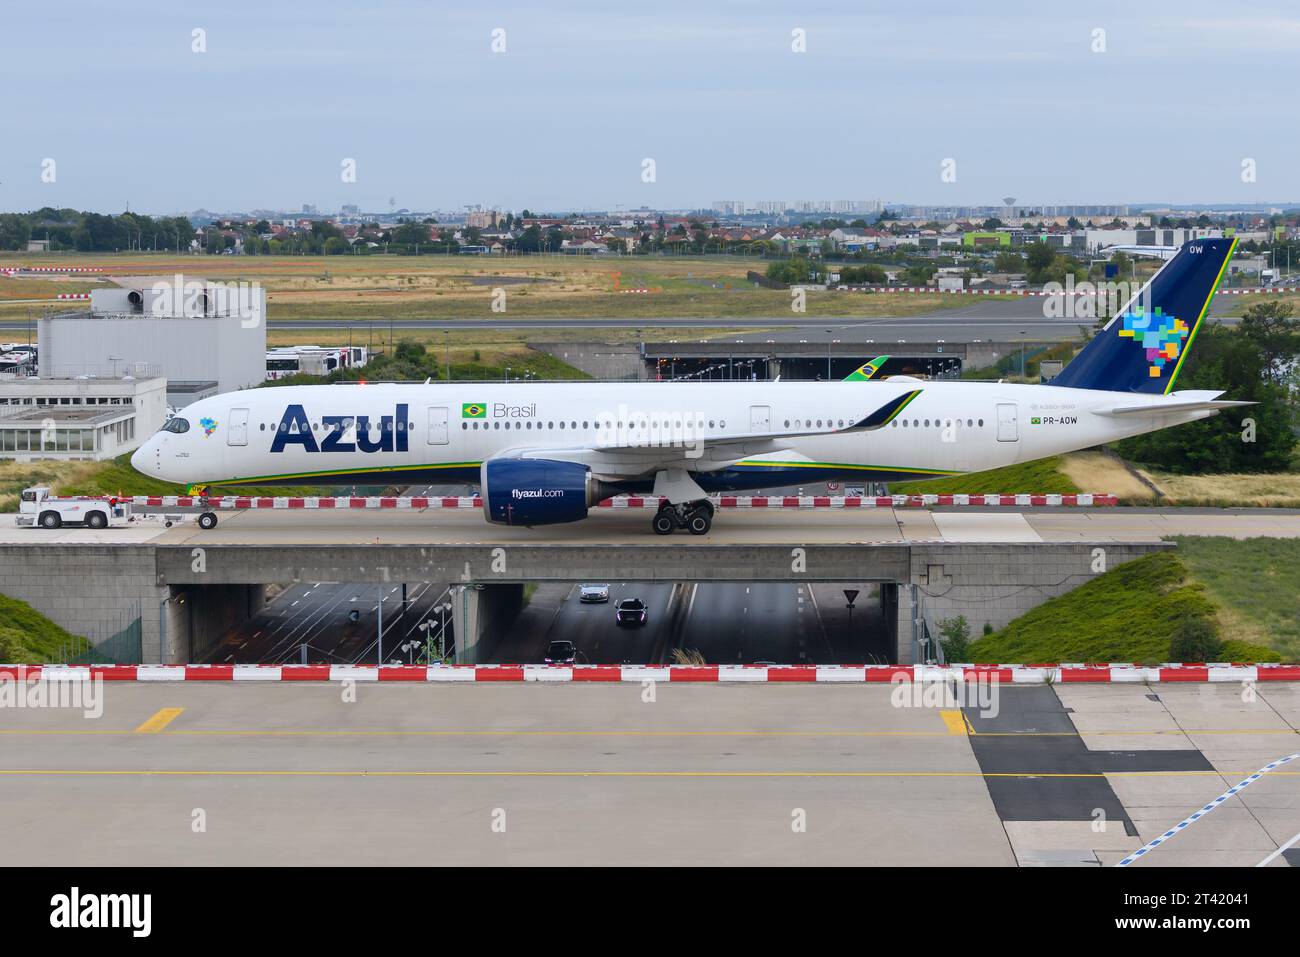 Azul Brazilian Airlines Airbus A350 aircraft taxiing at Paris Orly Airport, France. Airplane of airline Azul Linhas Aéreas from Brazil A350-900. Stock Photo